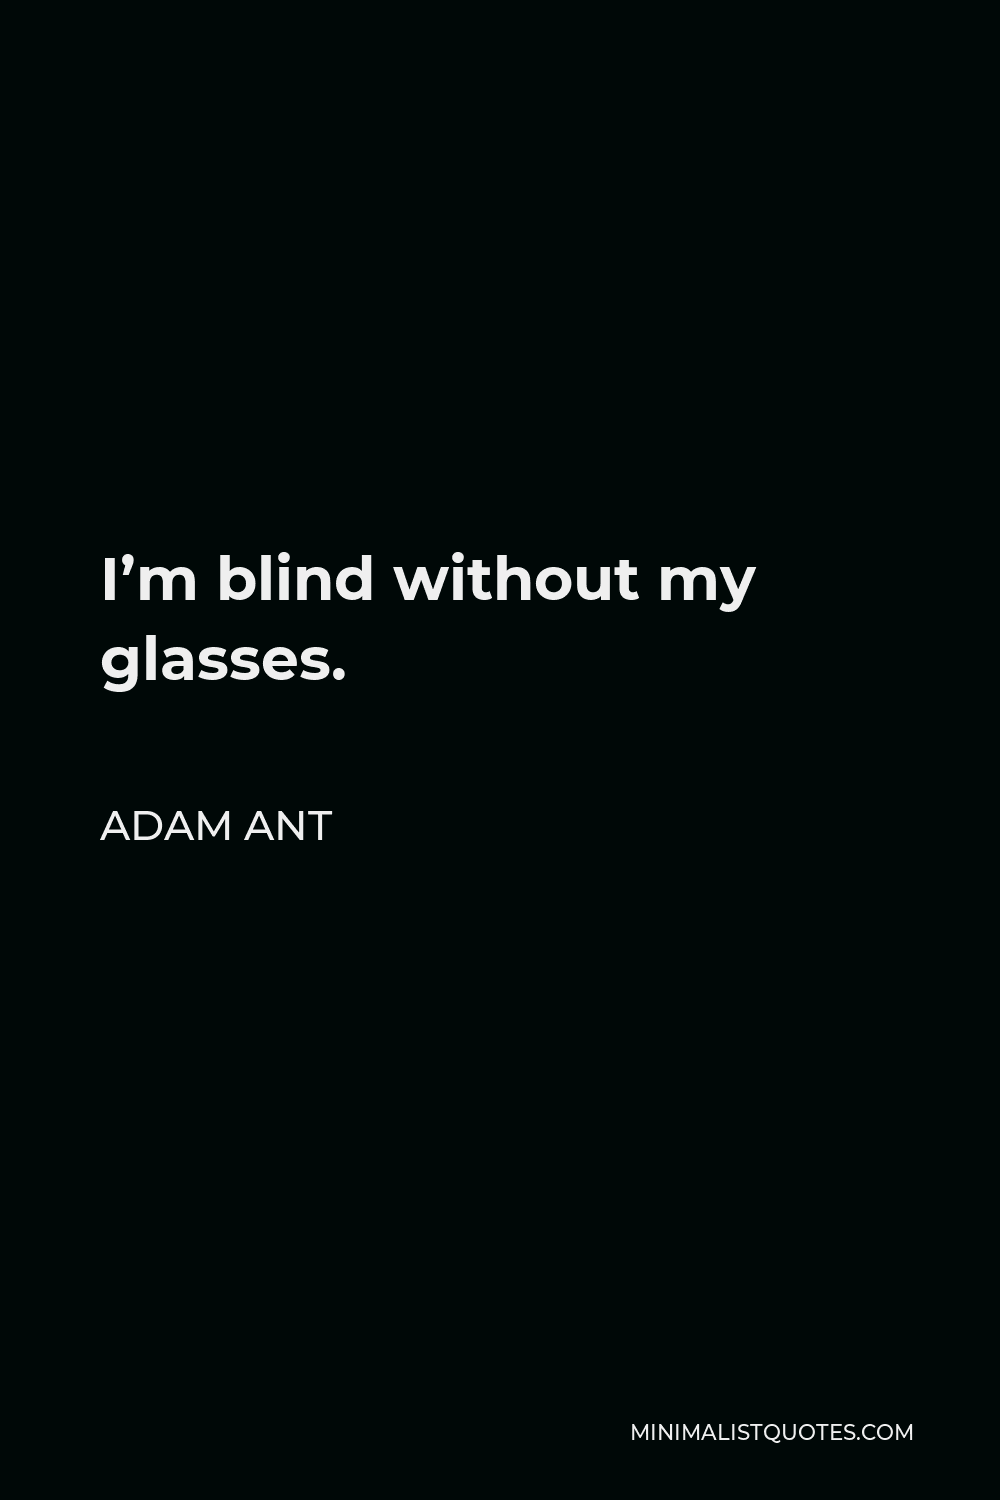 Adam Ant Quote - I’m blind without my glasses.